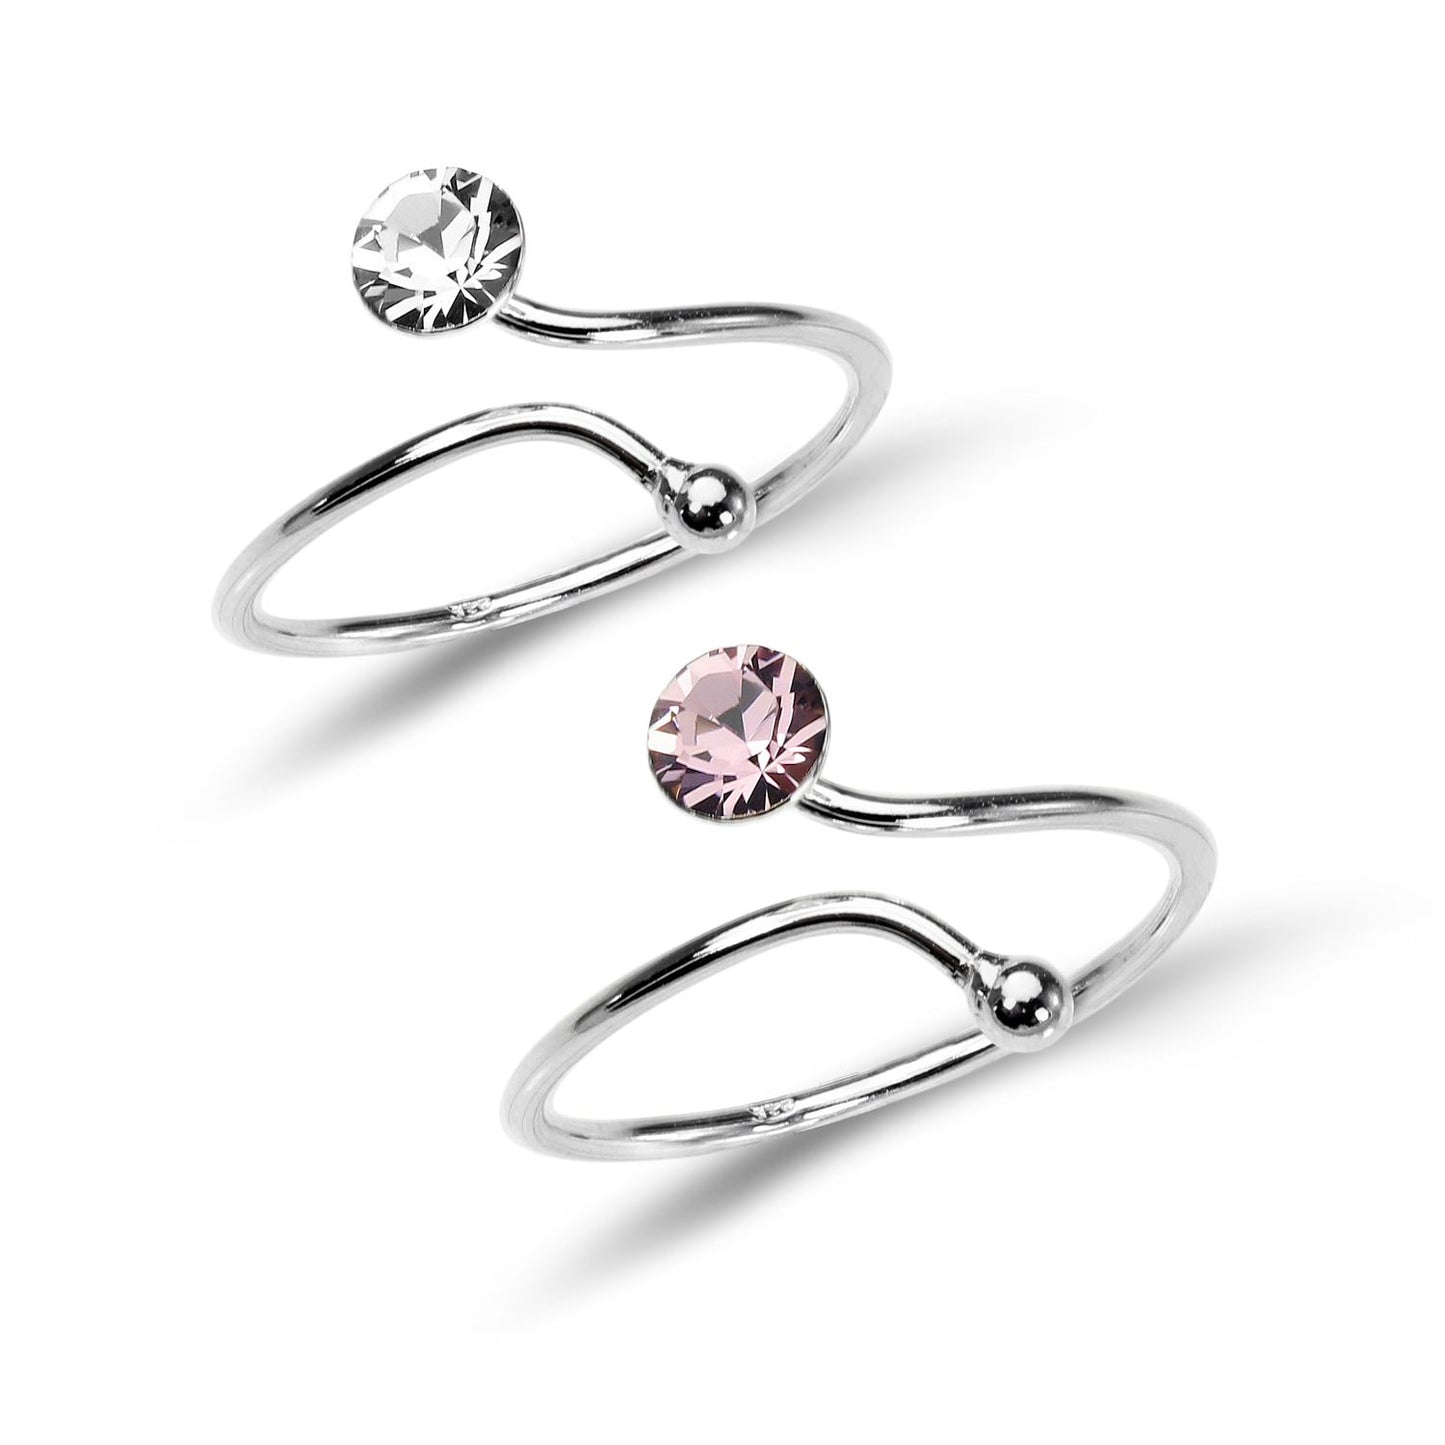 Sterling Silver Adjustable Wire Toe Ring with 4mm Crystal CZ